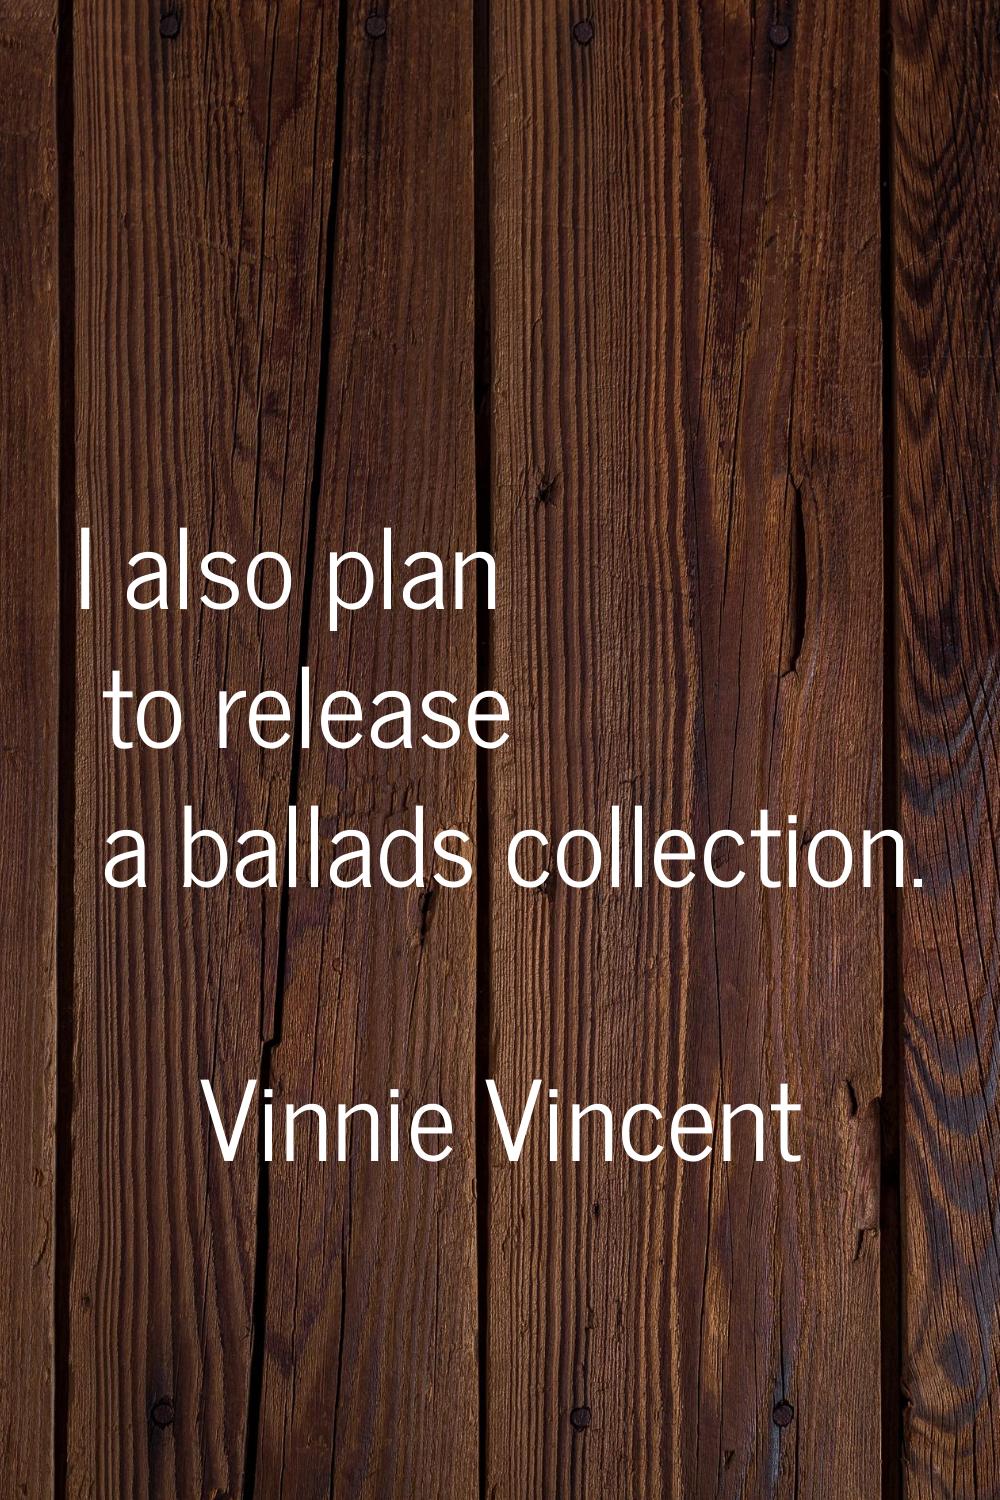 I also plan to release a ballads collection.